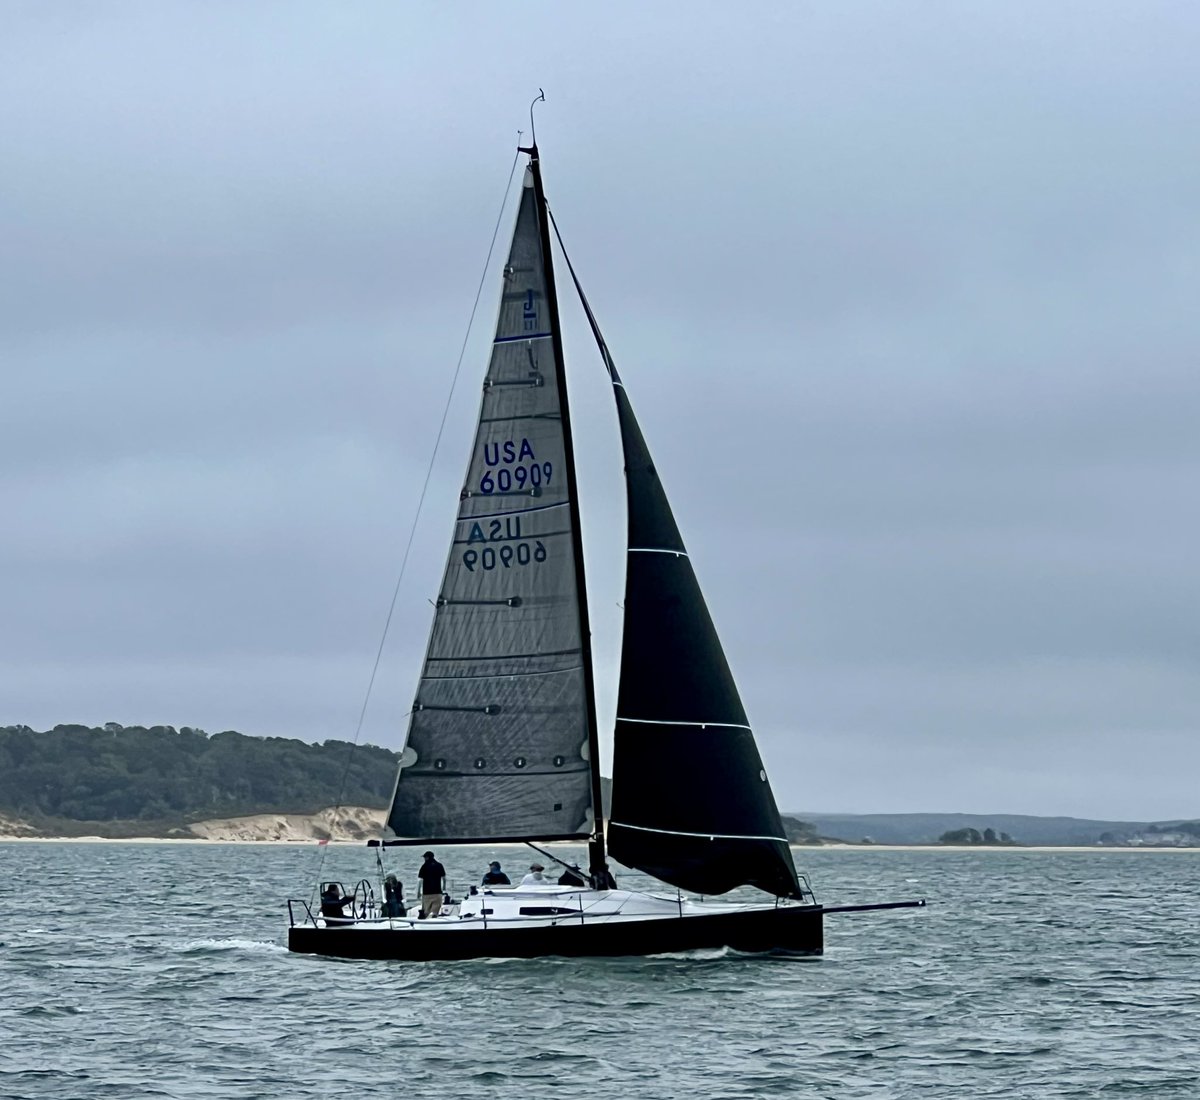 Team Lunatic Fringe was at it again this weekend in Whitebread 30, taking 2nd overall out of 68 boats. We raced down the bay, around Shelter Island and back again, with good breeze the whole way. 
#whitebread30 #yachtracing #yachting #sailing